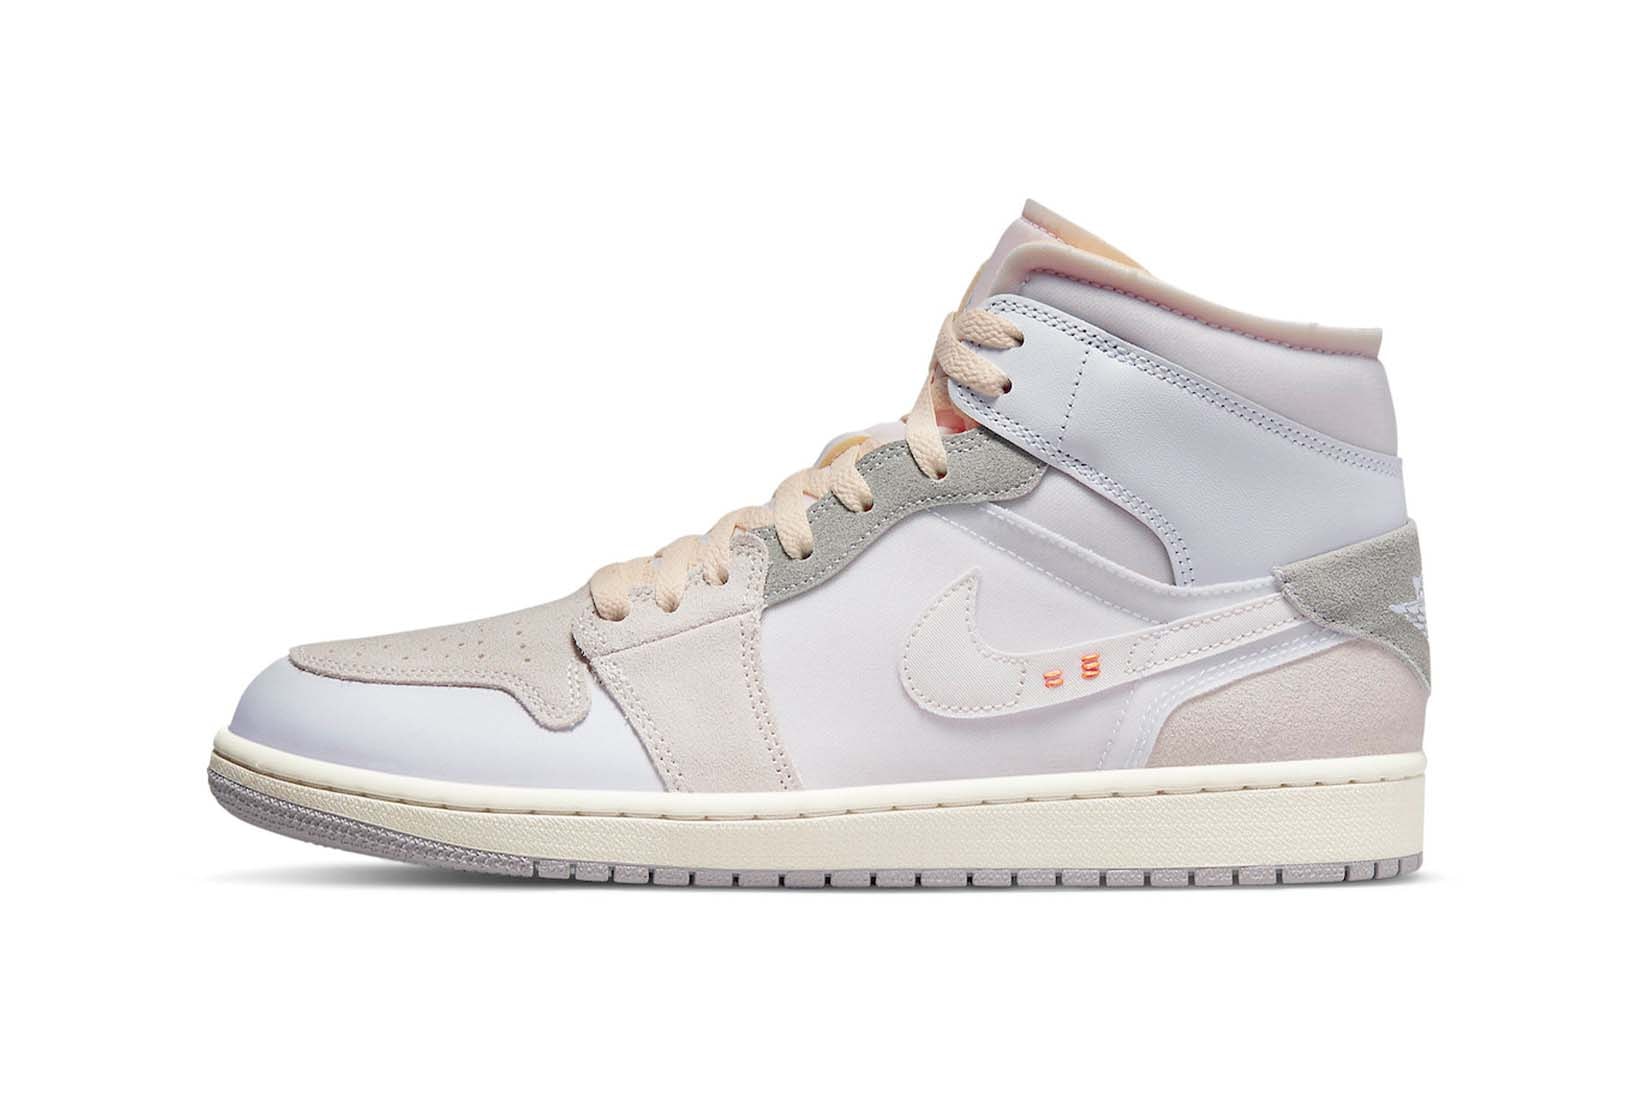 Nike Air Jordan 1 Mid Insole Out Price Release Date